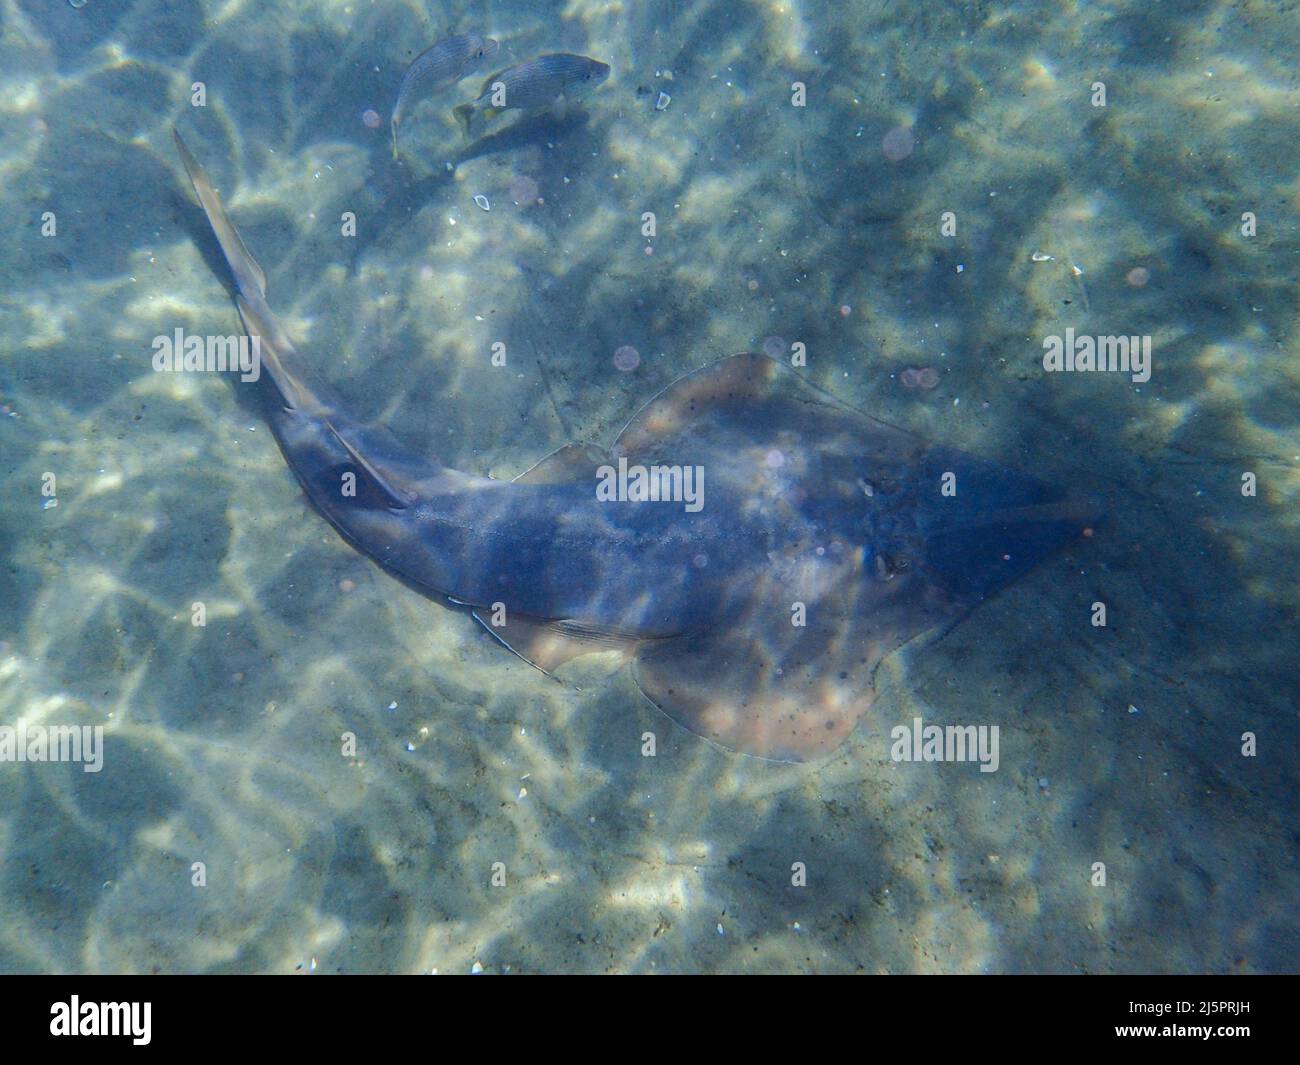 Shovelnose Ray swimming over coral reef, stingray Stock Photo